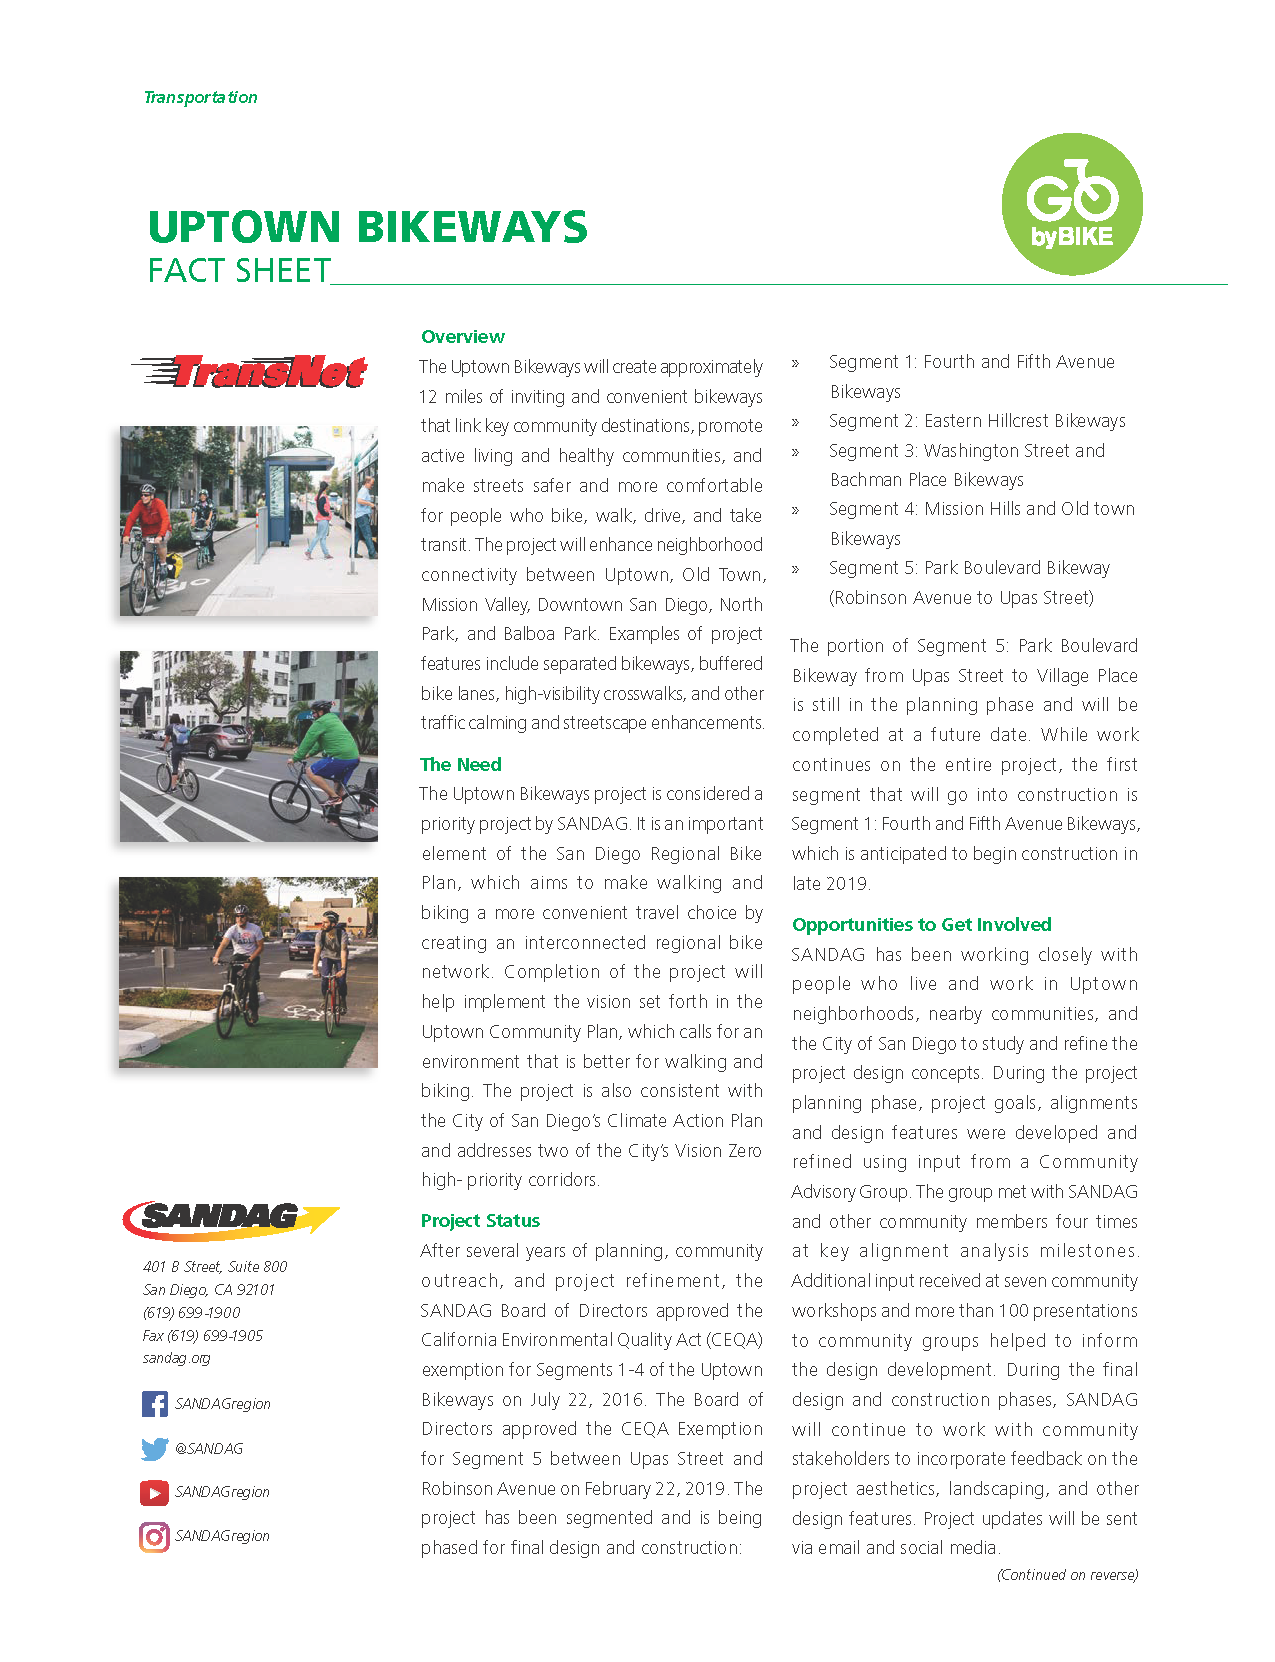 View the Uptown Bikeways project fact sheet in English.